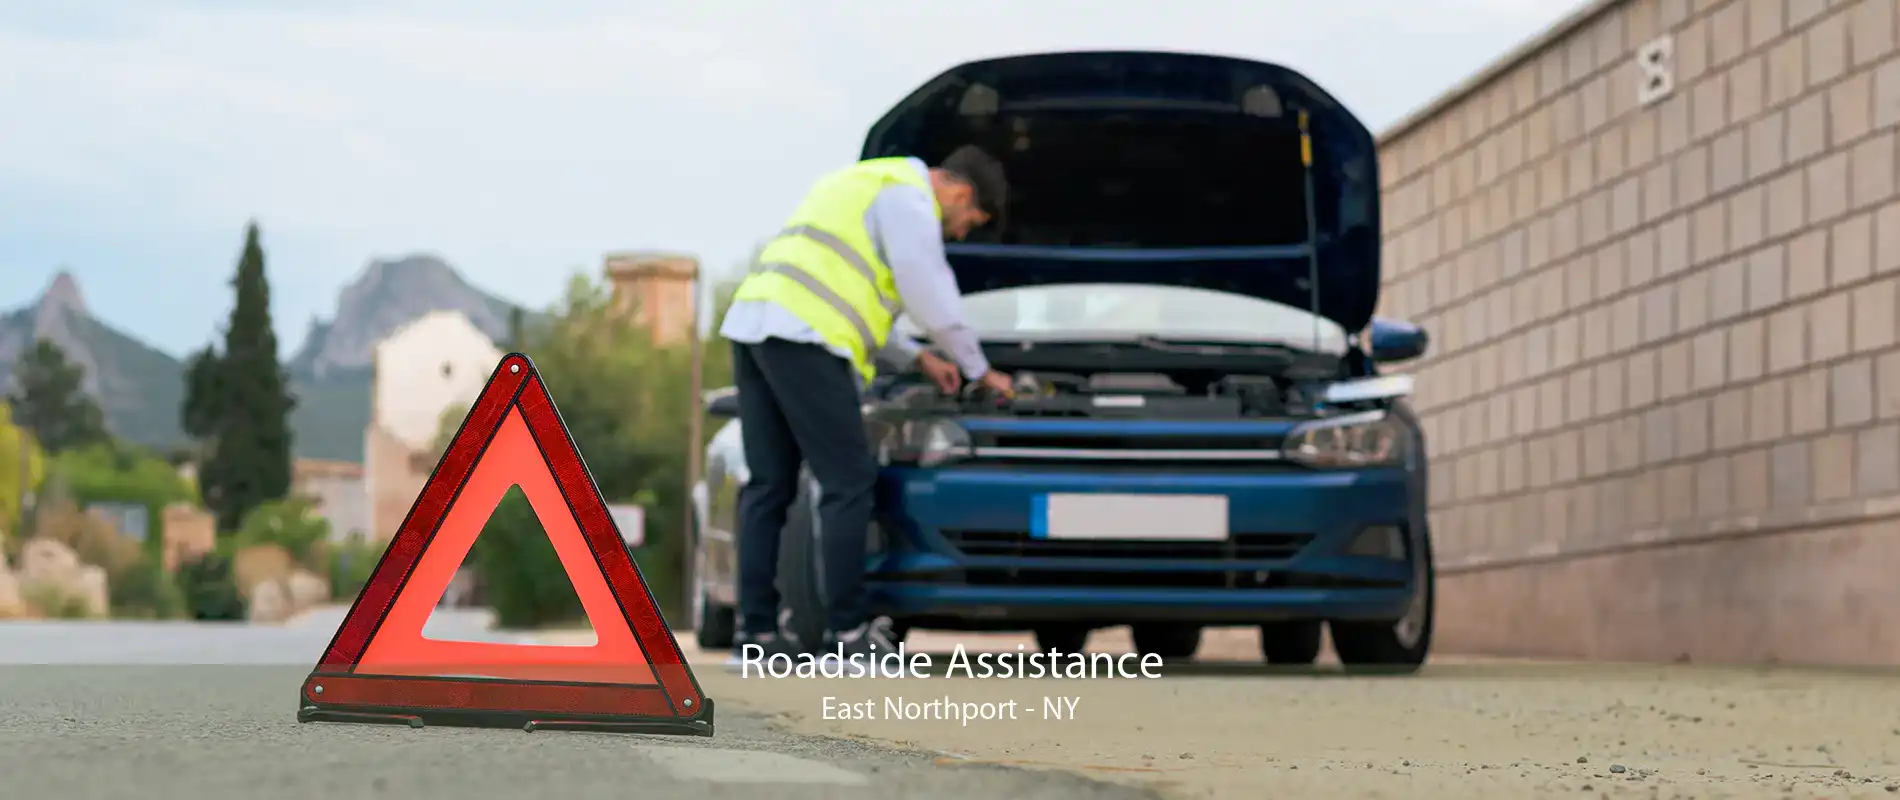 Roadside Assistance East Northport - NY